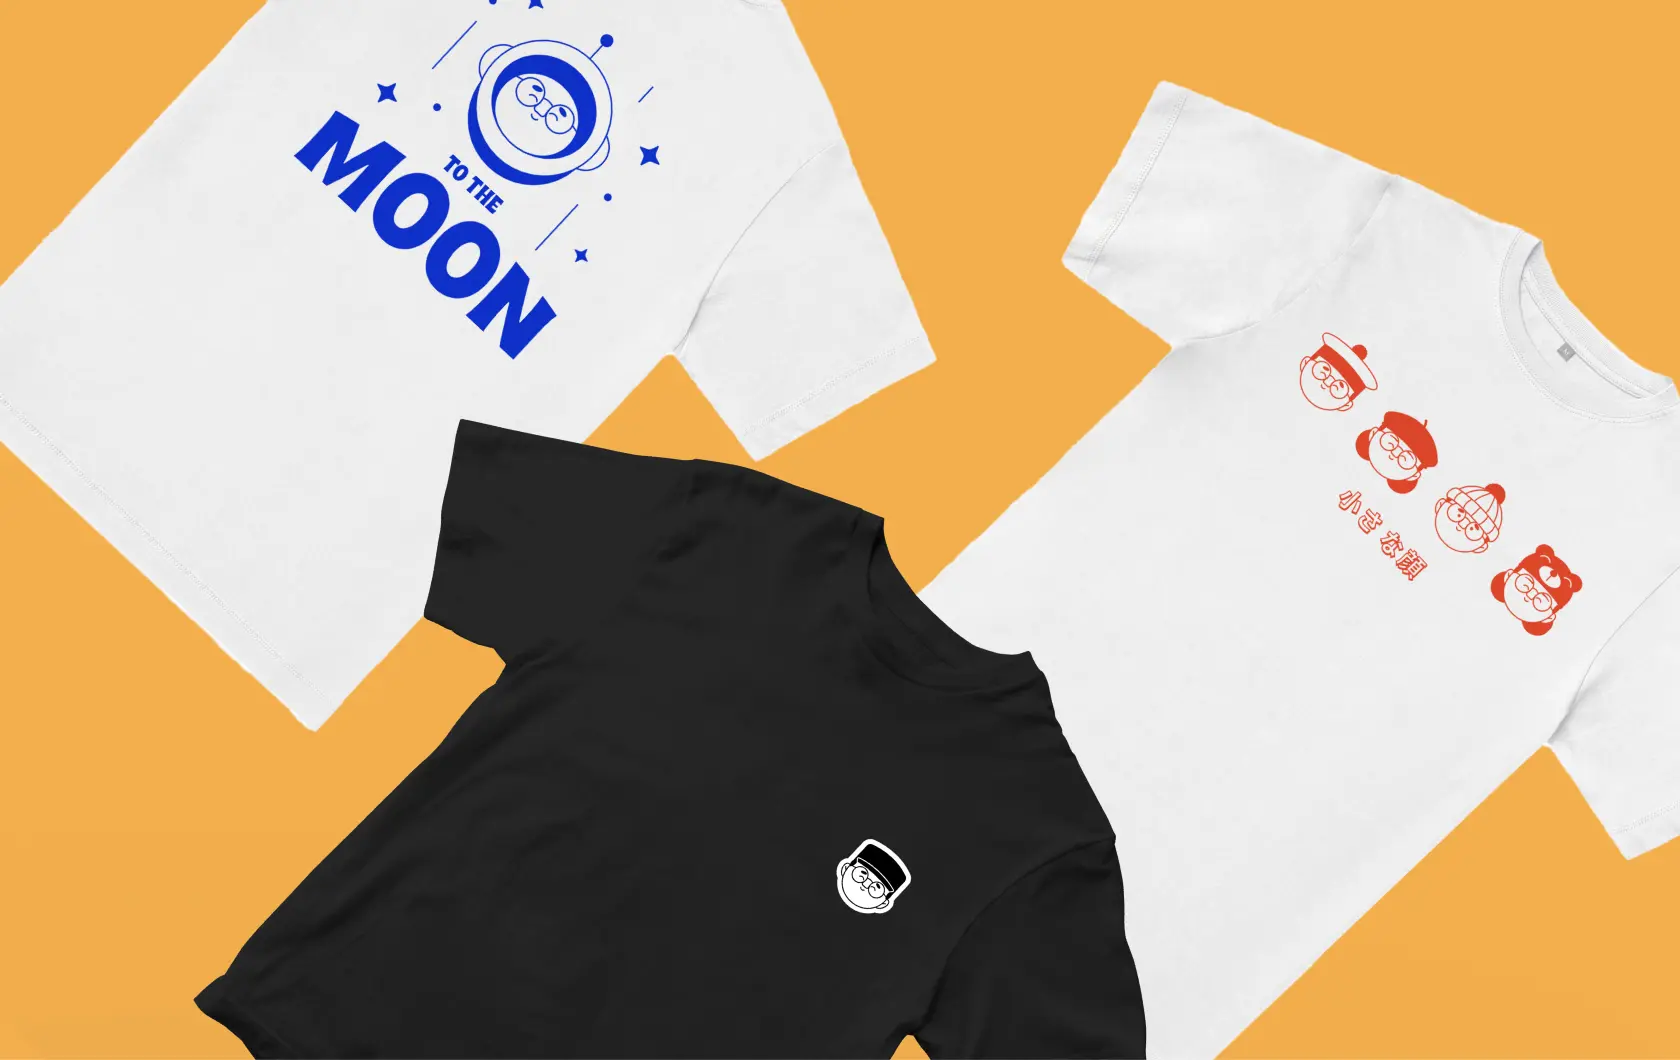 Three T-shirts with graphics: left, white with blue 'TO THE MOON' text and astronaut design; center, black with small white astronaut emblem on chest; right, white with red caricatures and Asian characters.